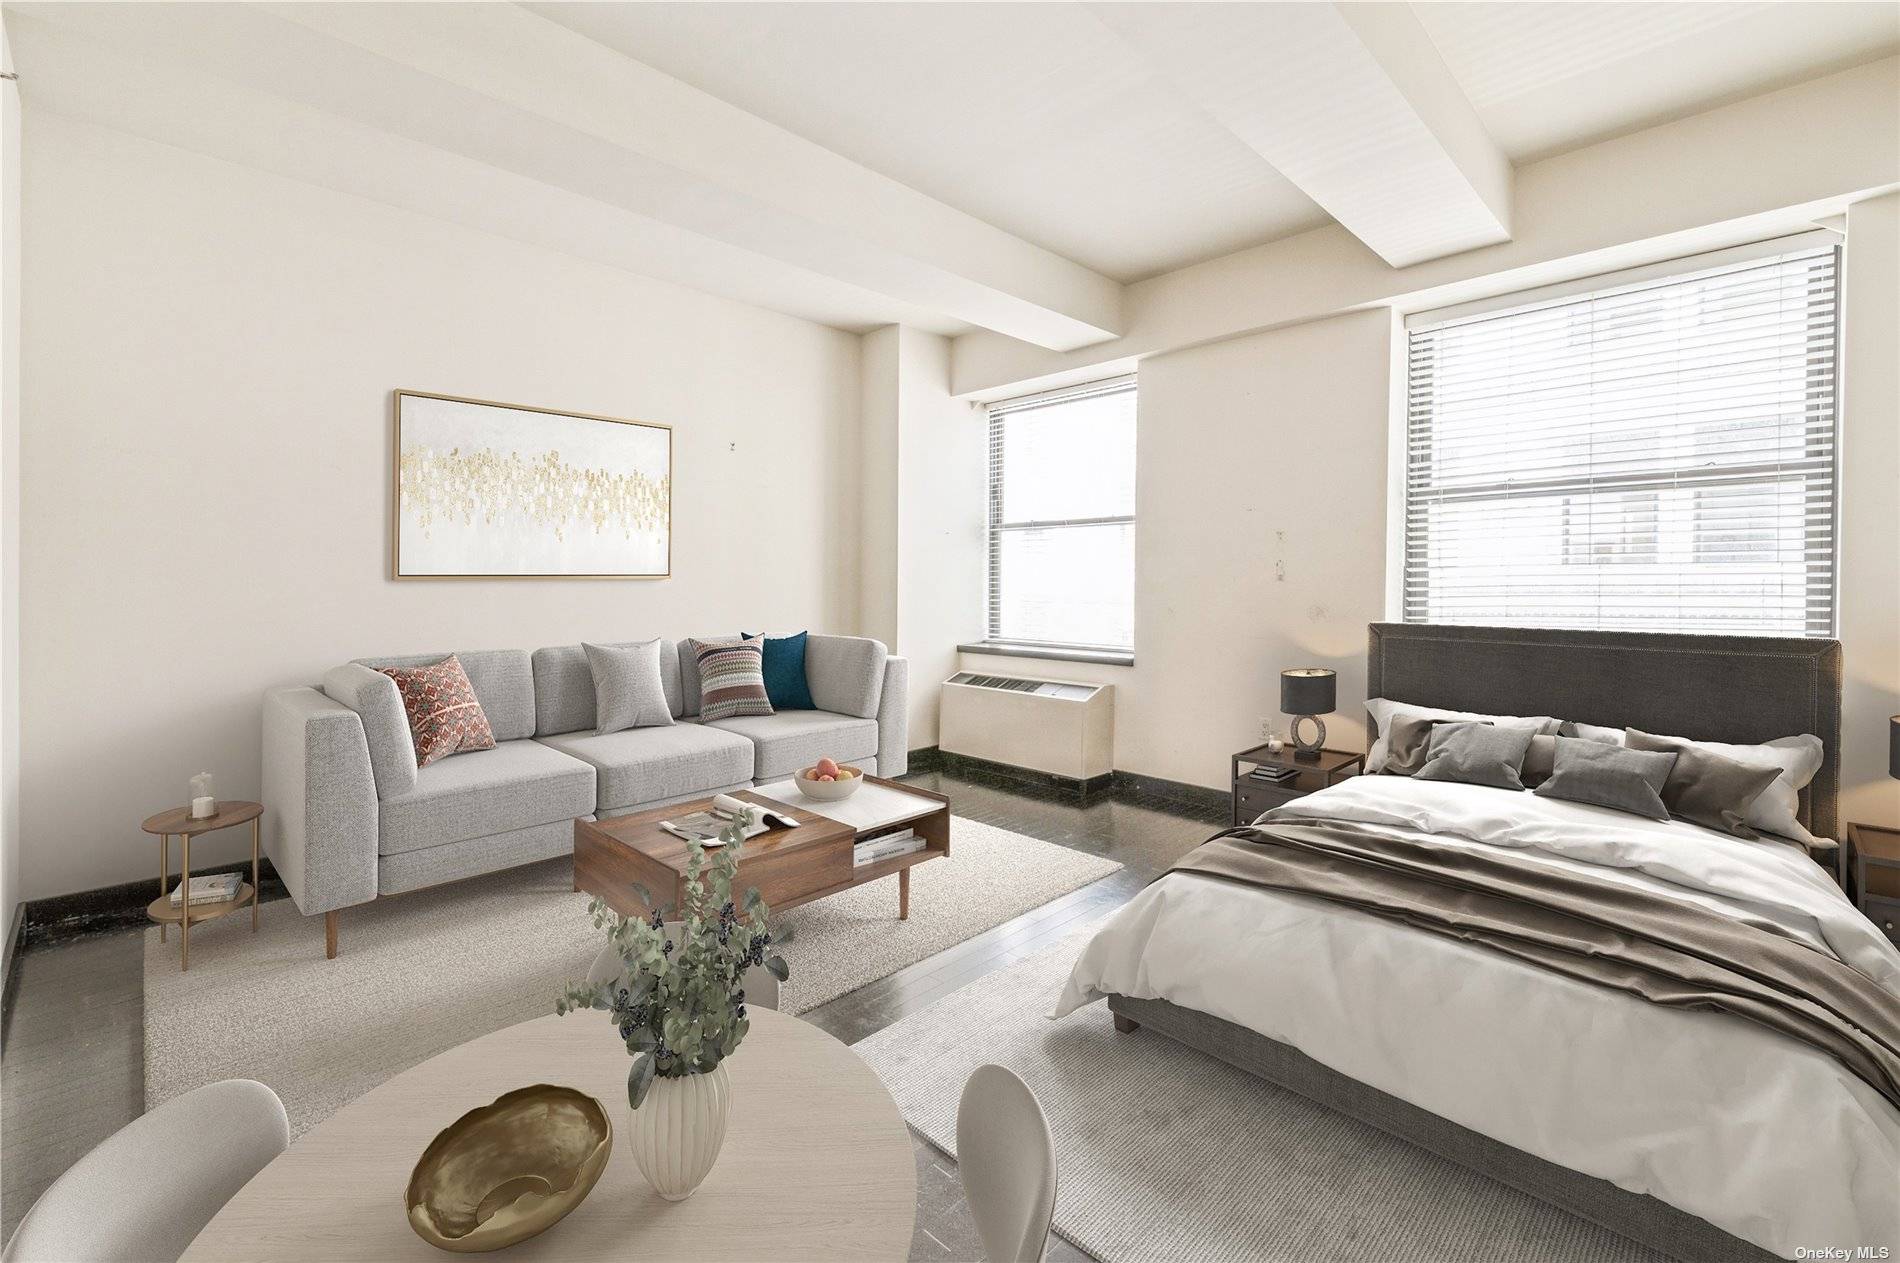 Stylish studio apartment in the heart of the financial district, located in the iconic 20 Pine street, The Collection.